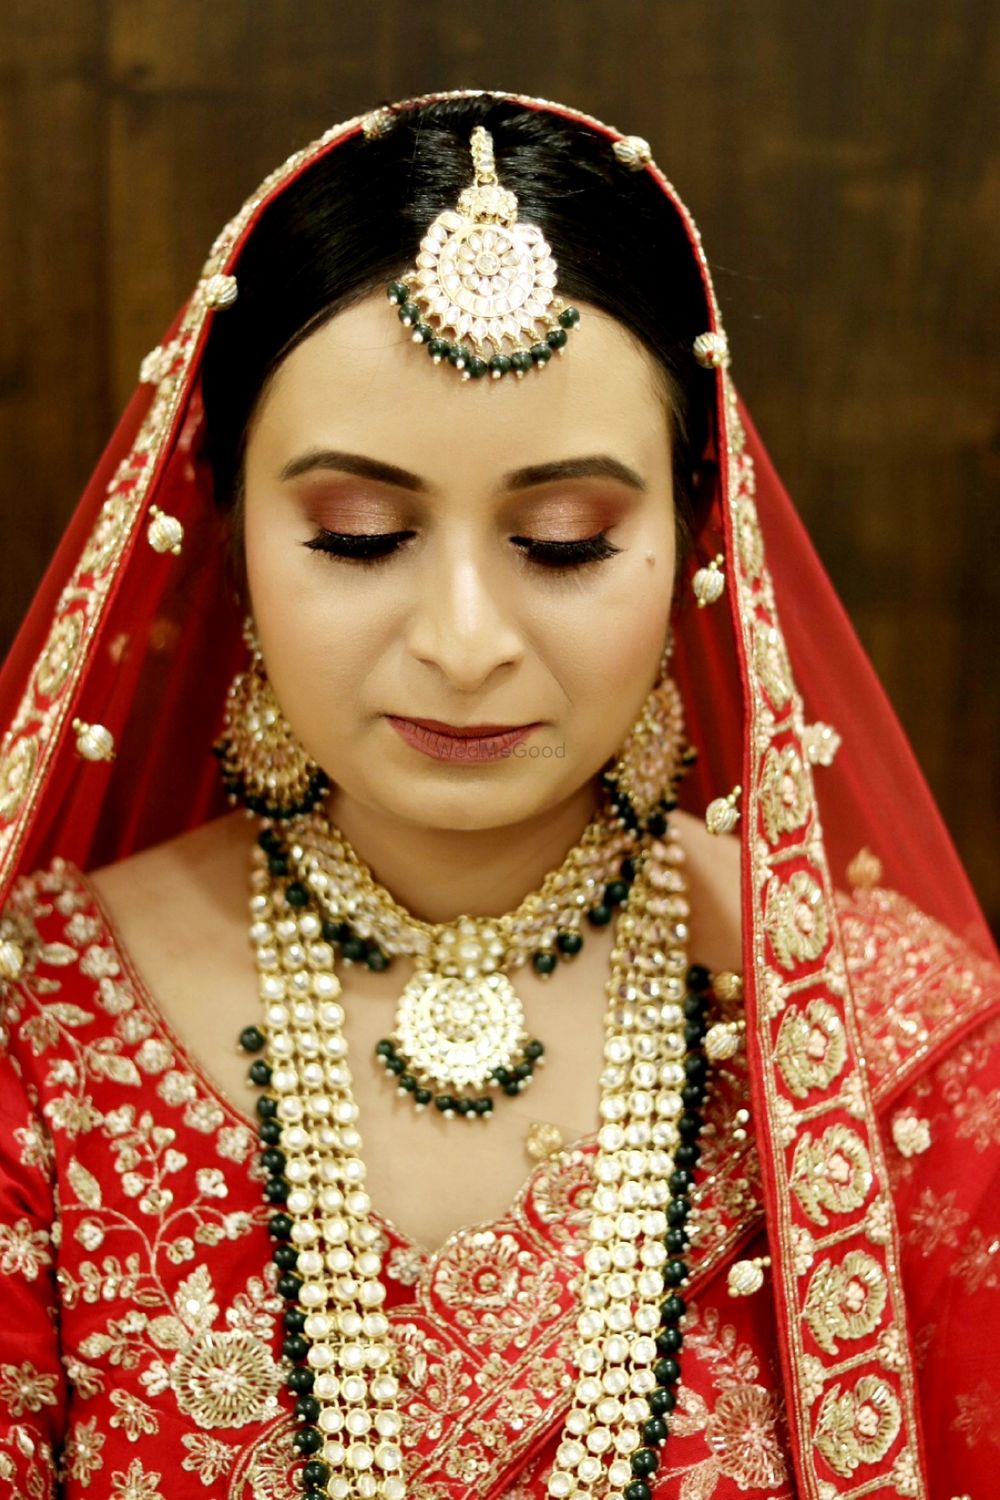 Photo From South-Bengali mixed culture bride - By Namrata's Studio